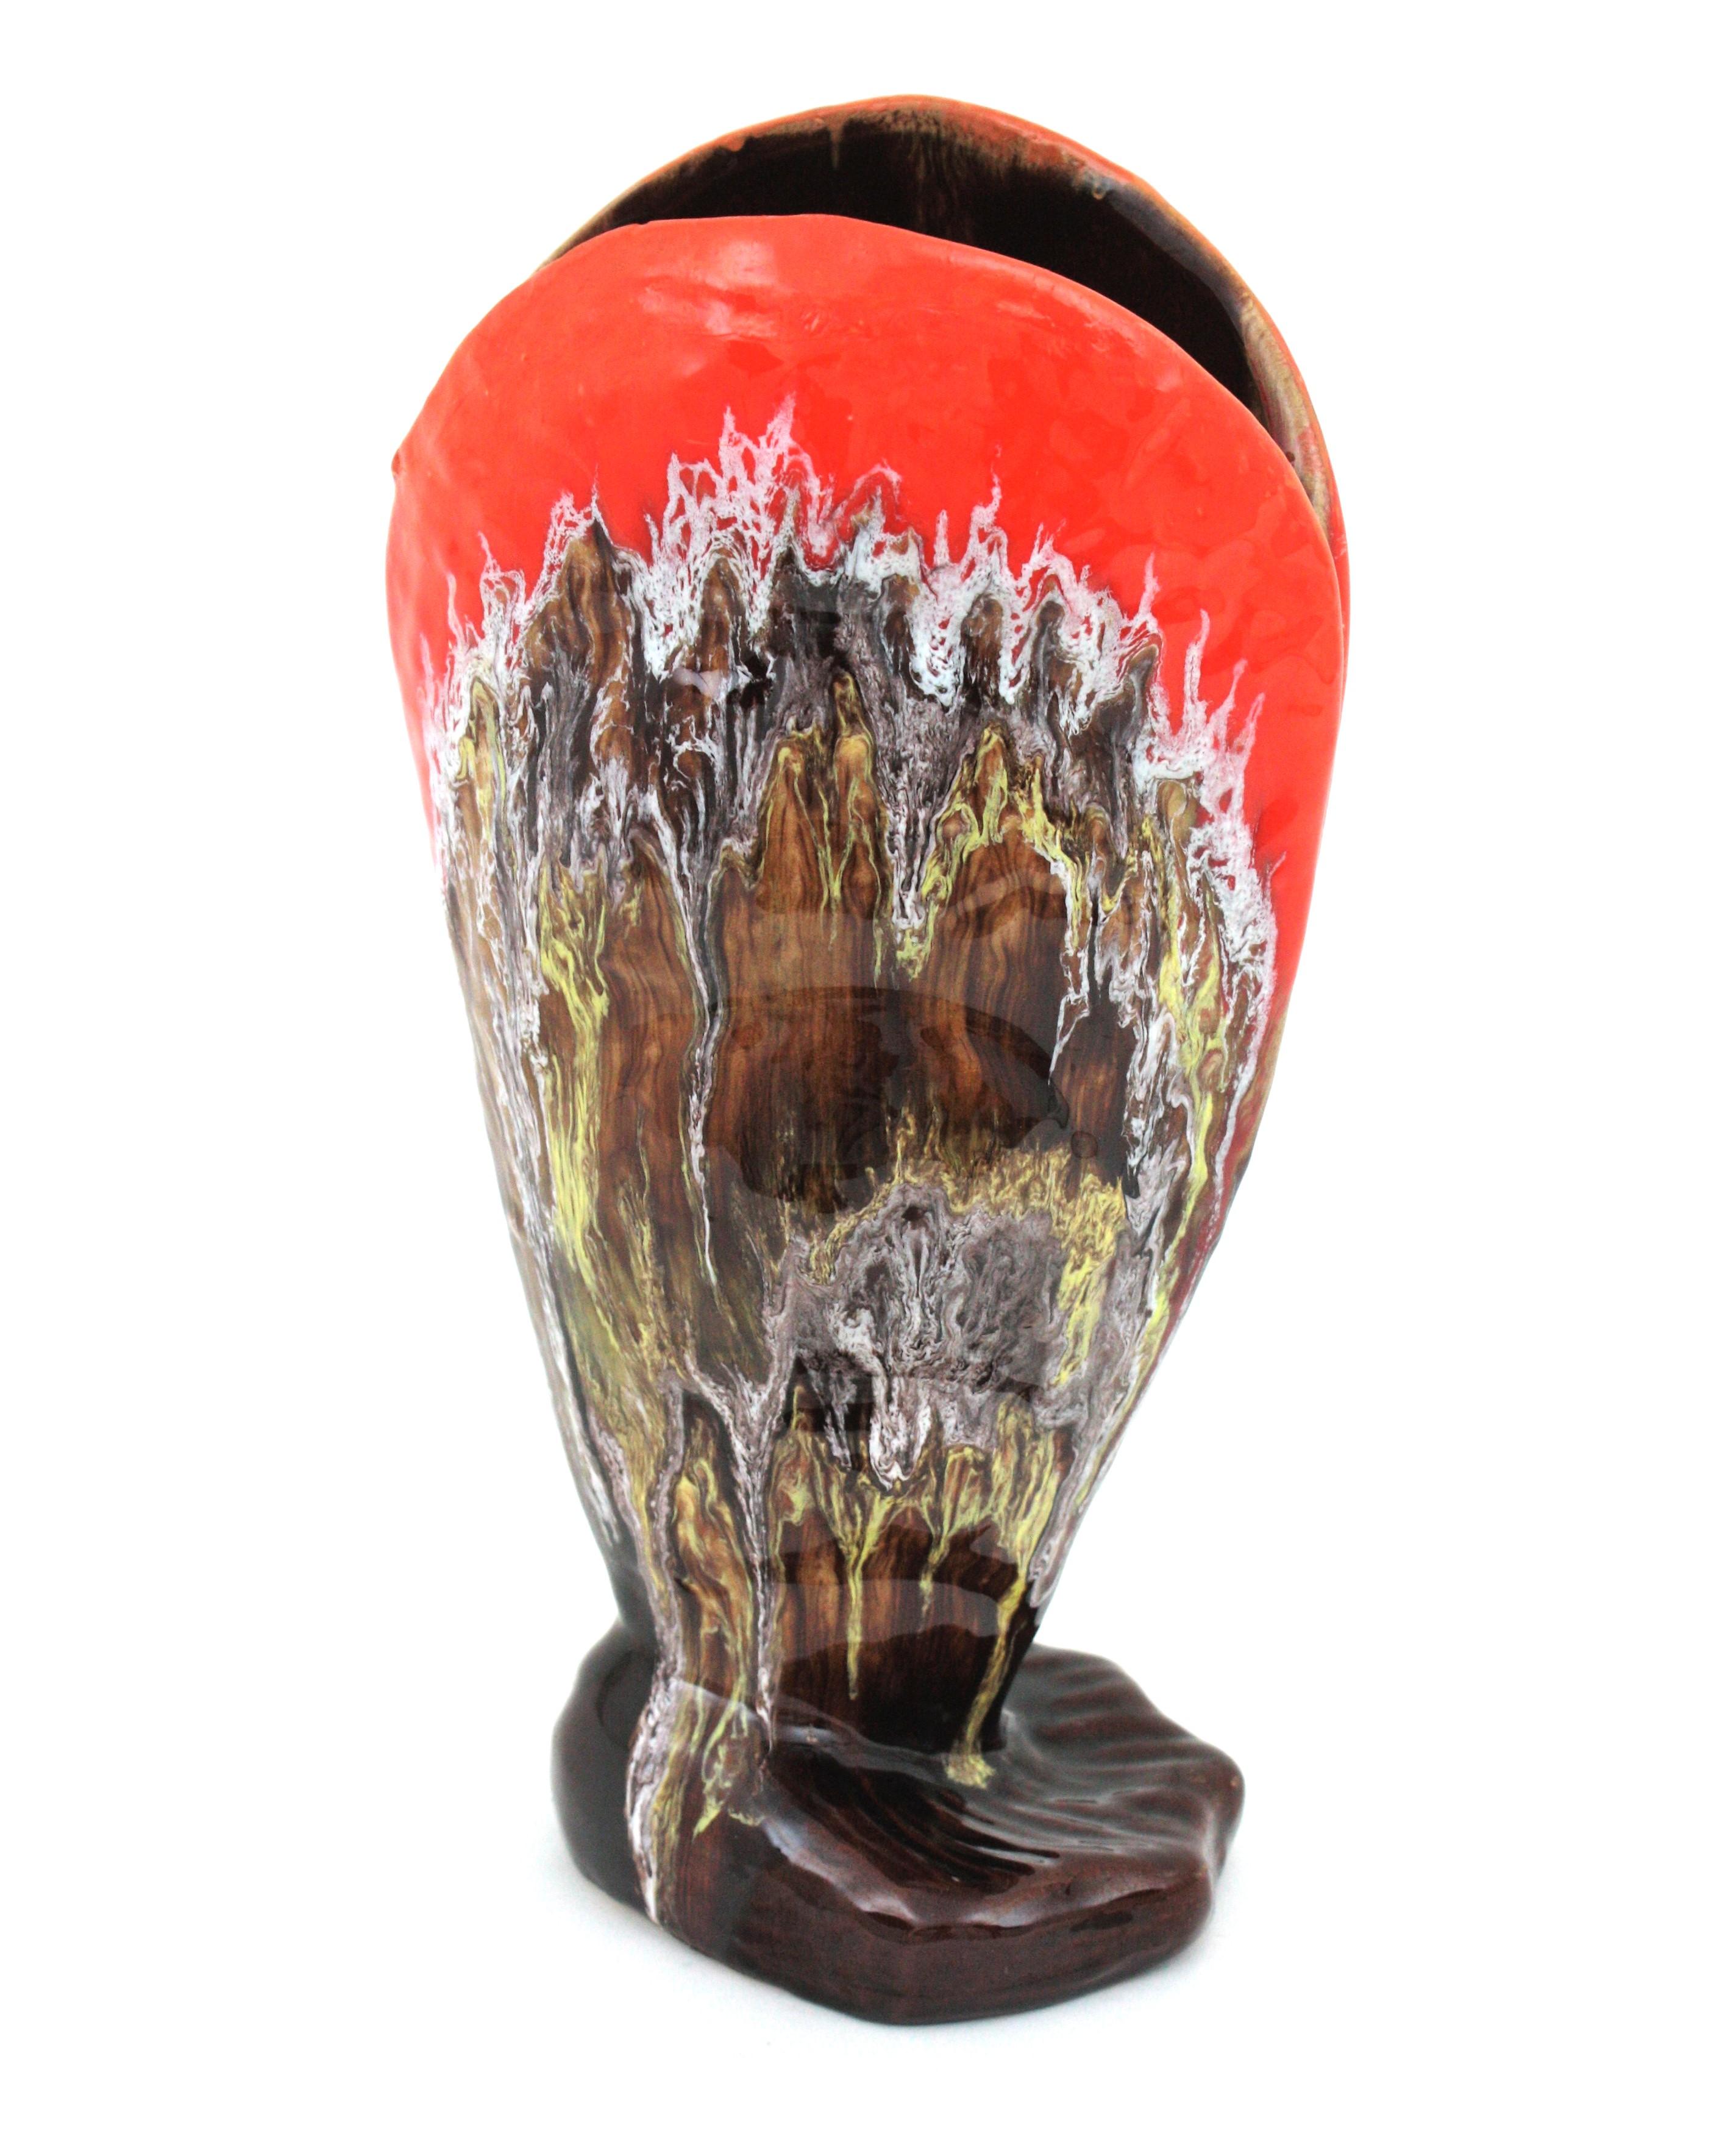 Mid-Century Modern Large Vallauris Majolica Shell Shaped Vase, Orange and Brown Glazed Ceramic For Sale